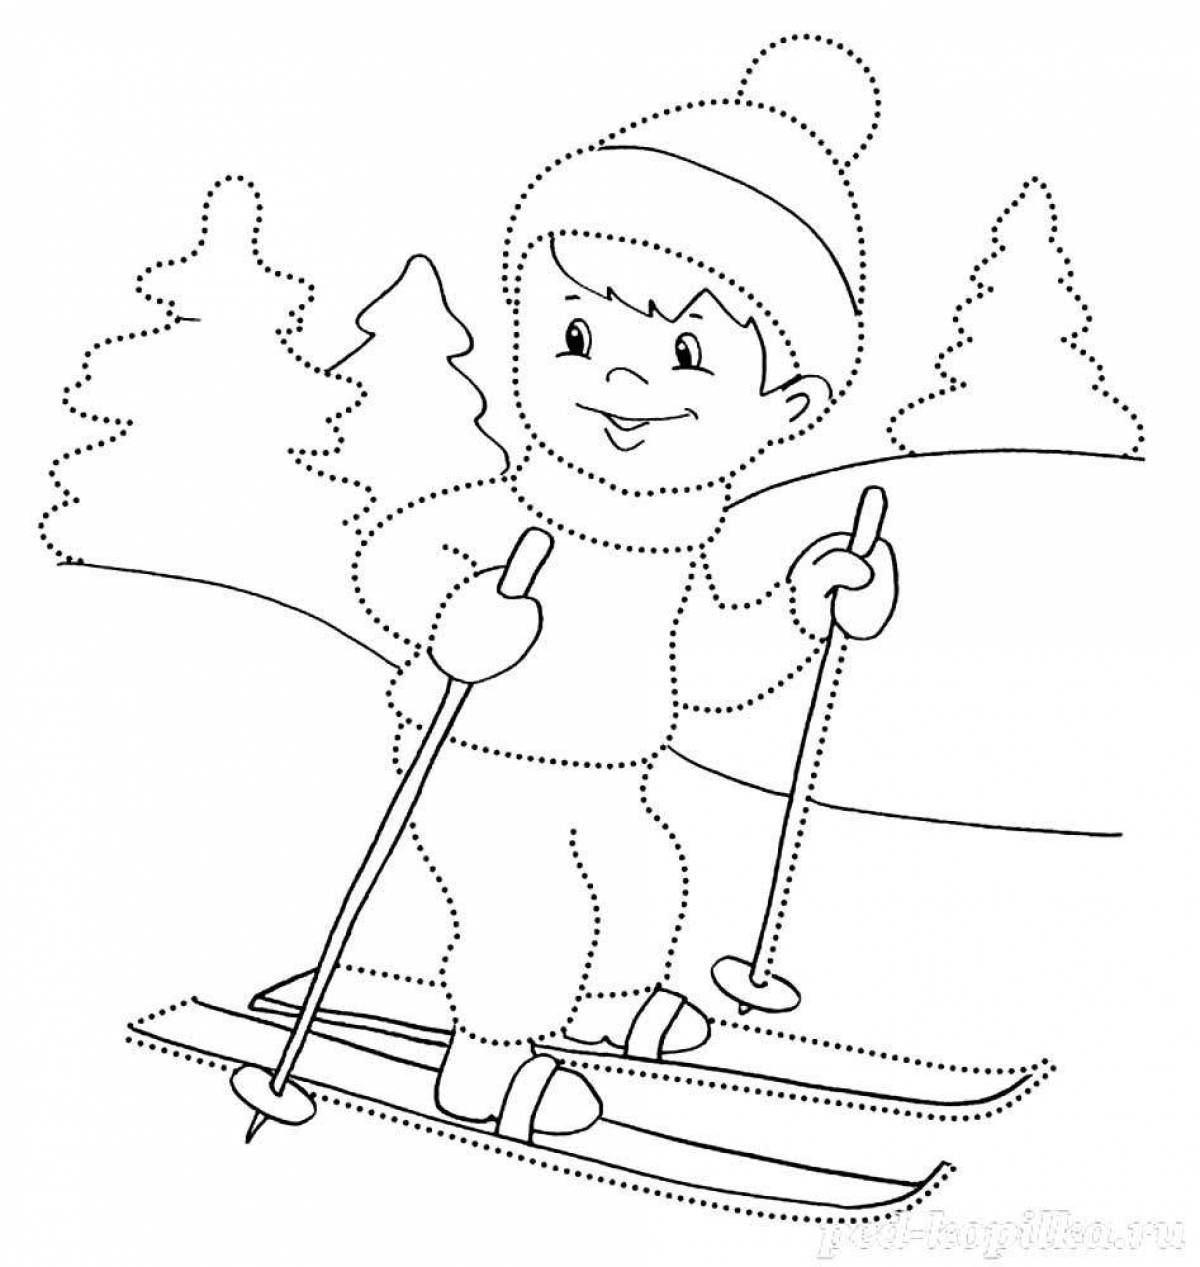 Coloring book exquisite skier